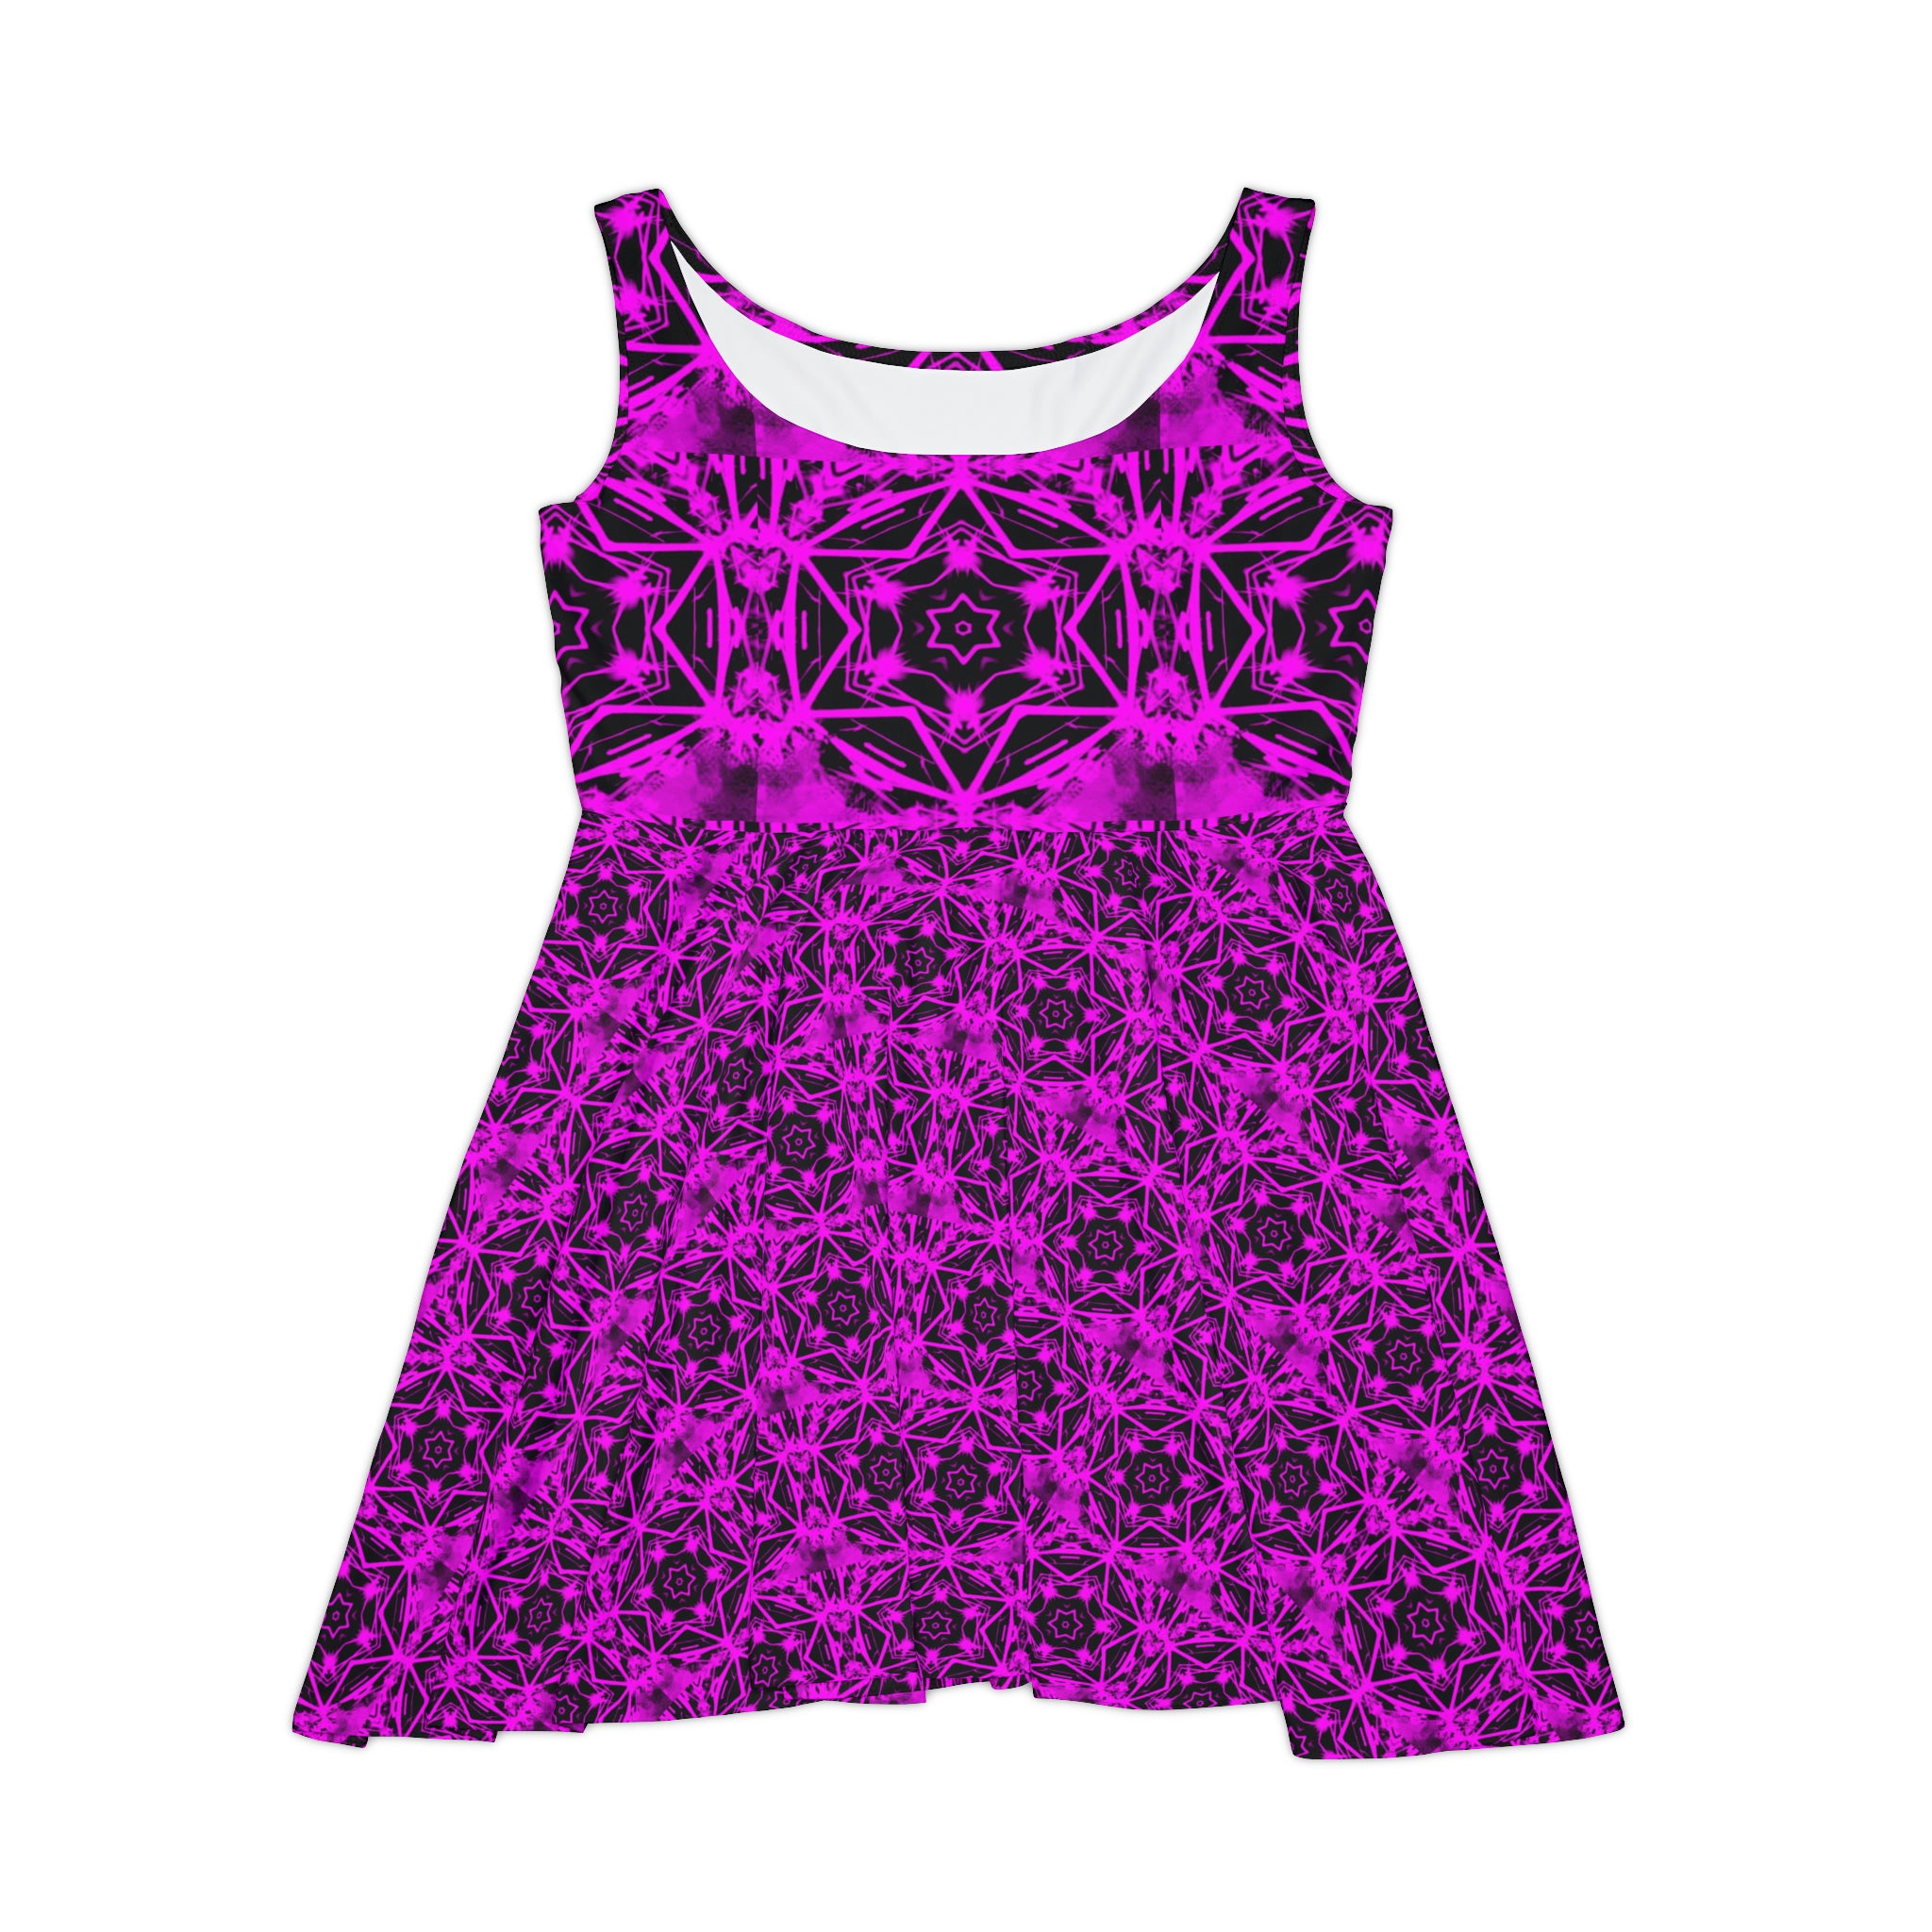 Purple Stars Pattern Printed Skater Dress up to 2XL - Shell Design Boutique